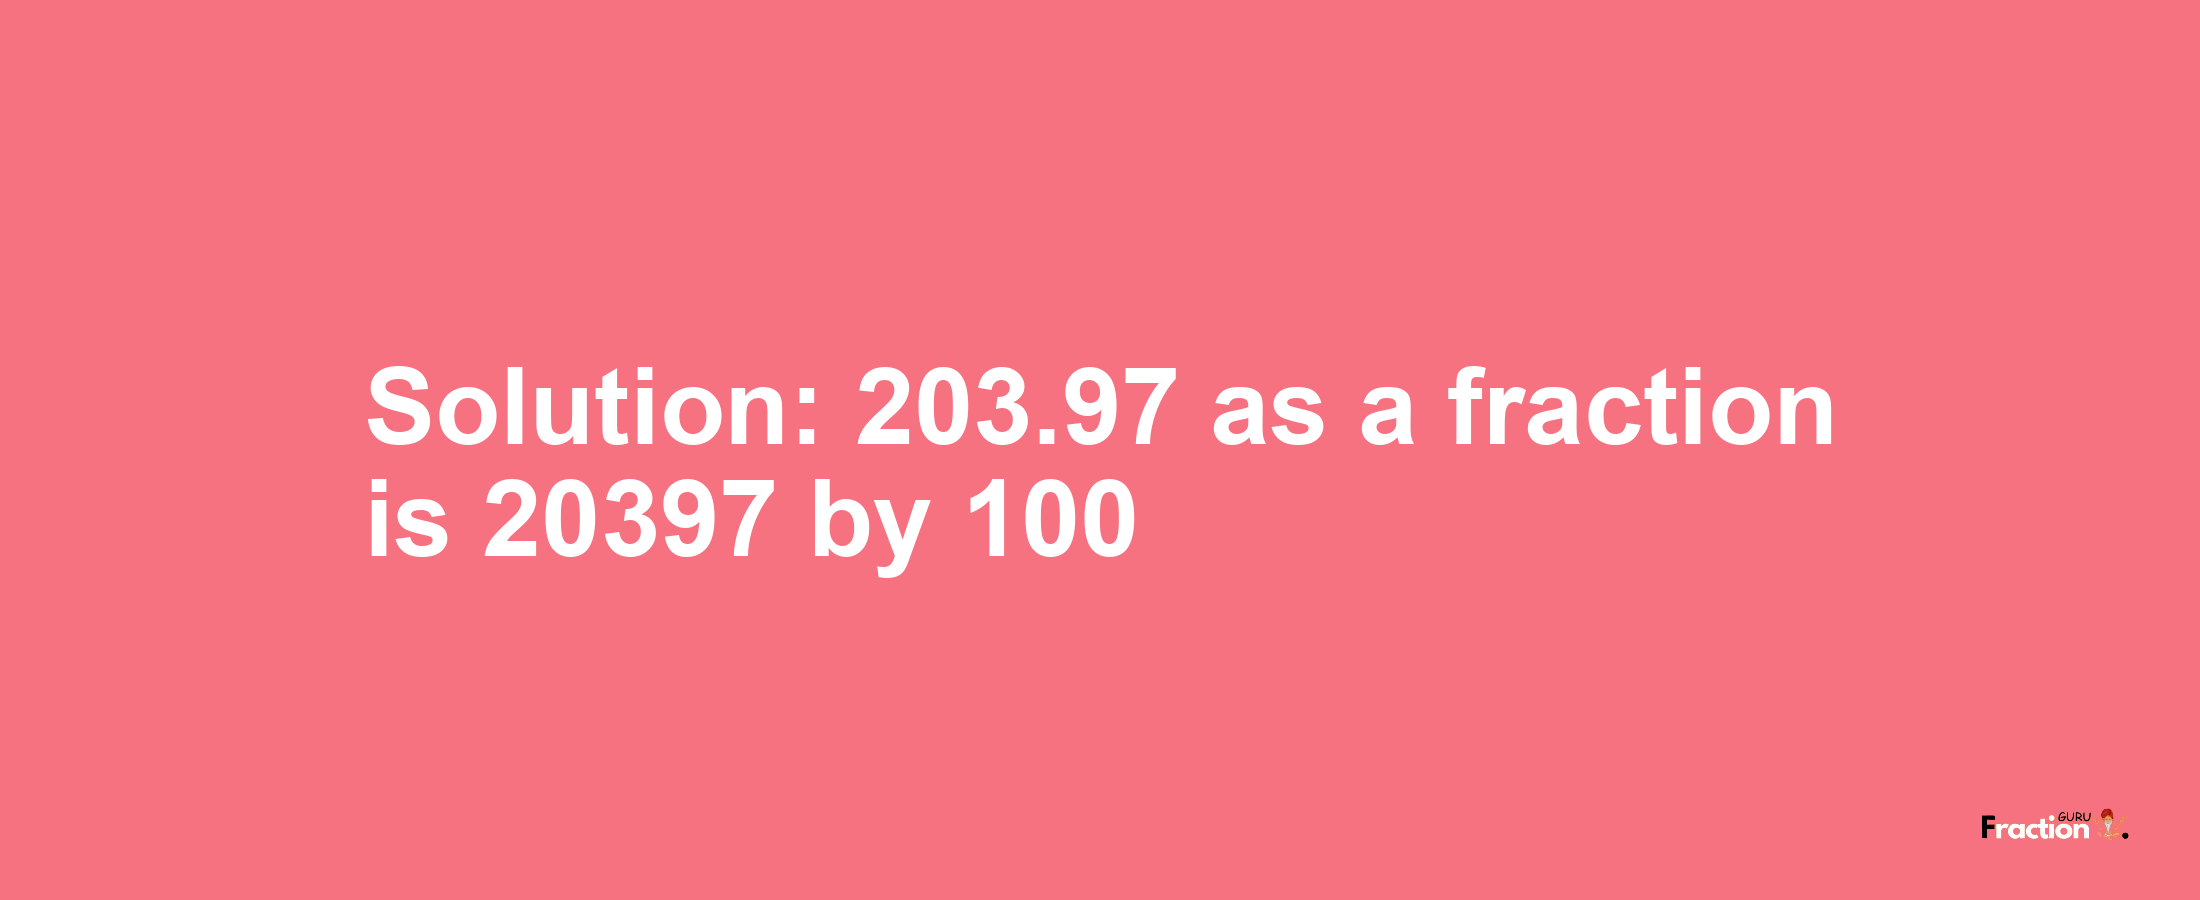 Solution:203.97 as a fraction is 20397/100